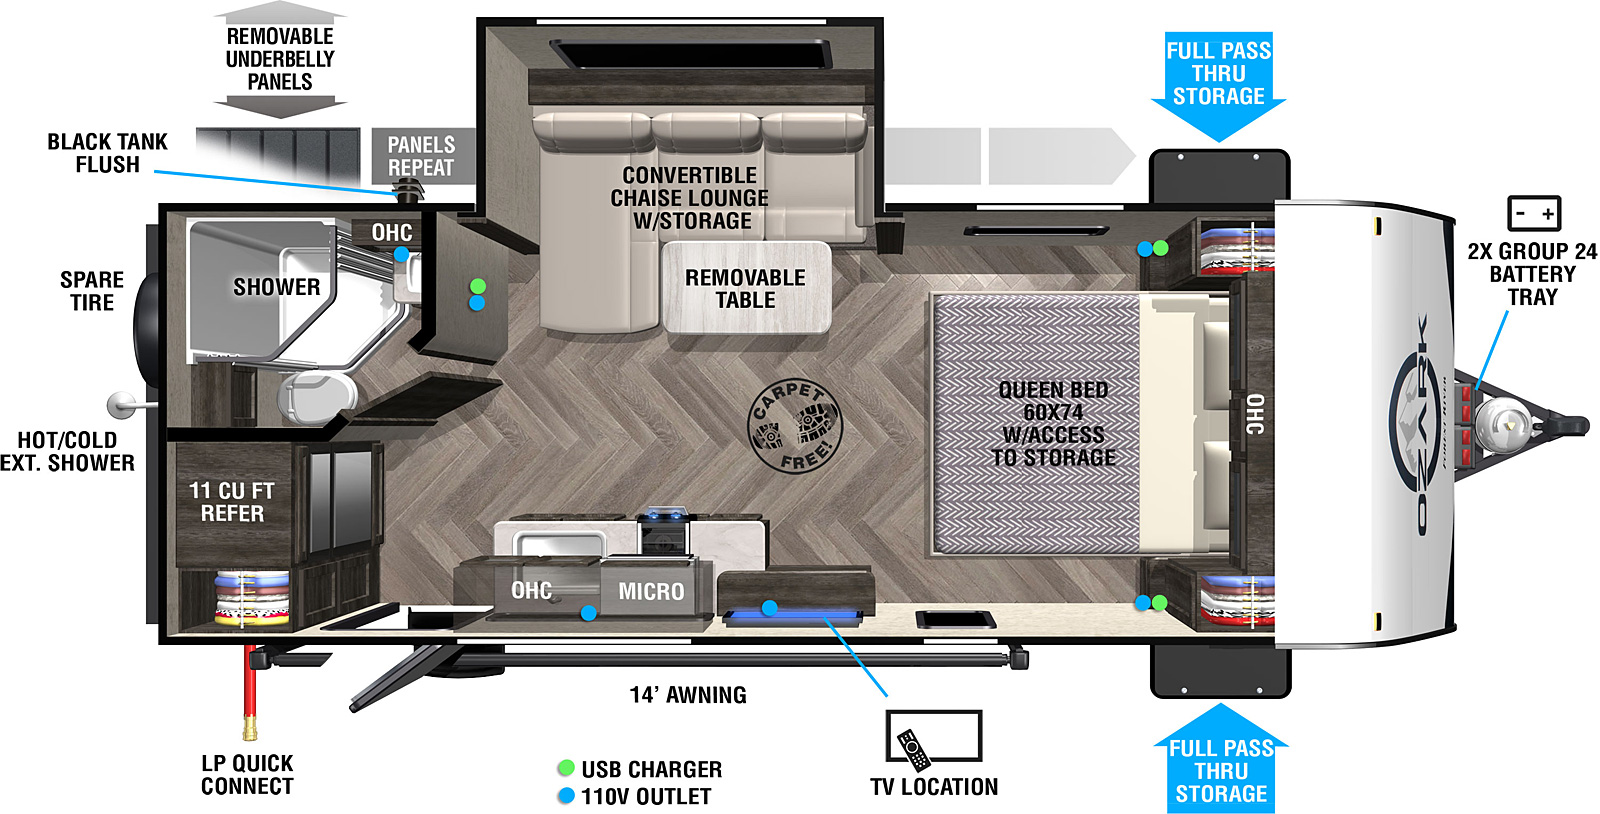 Ozark 1800QS floorplan. The 1800QS has one slide out and one entry door.